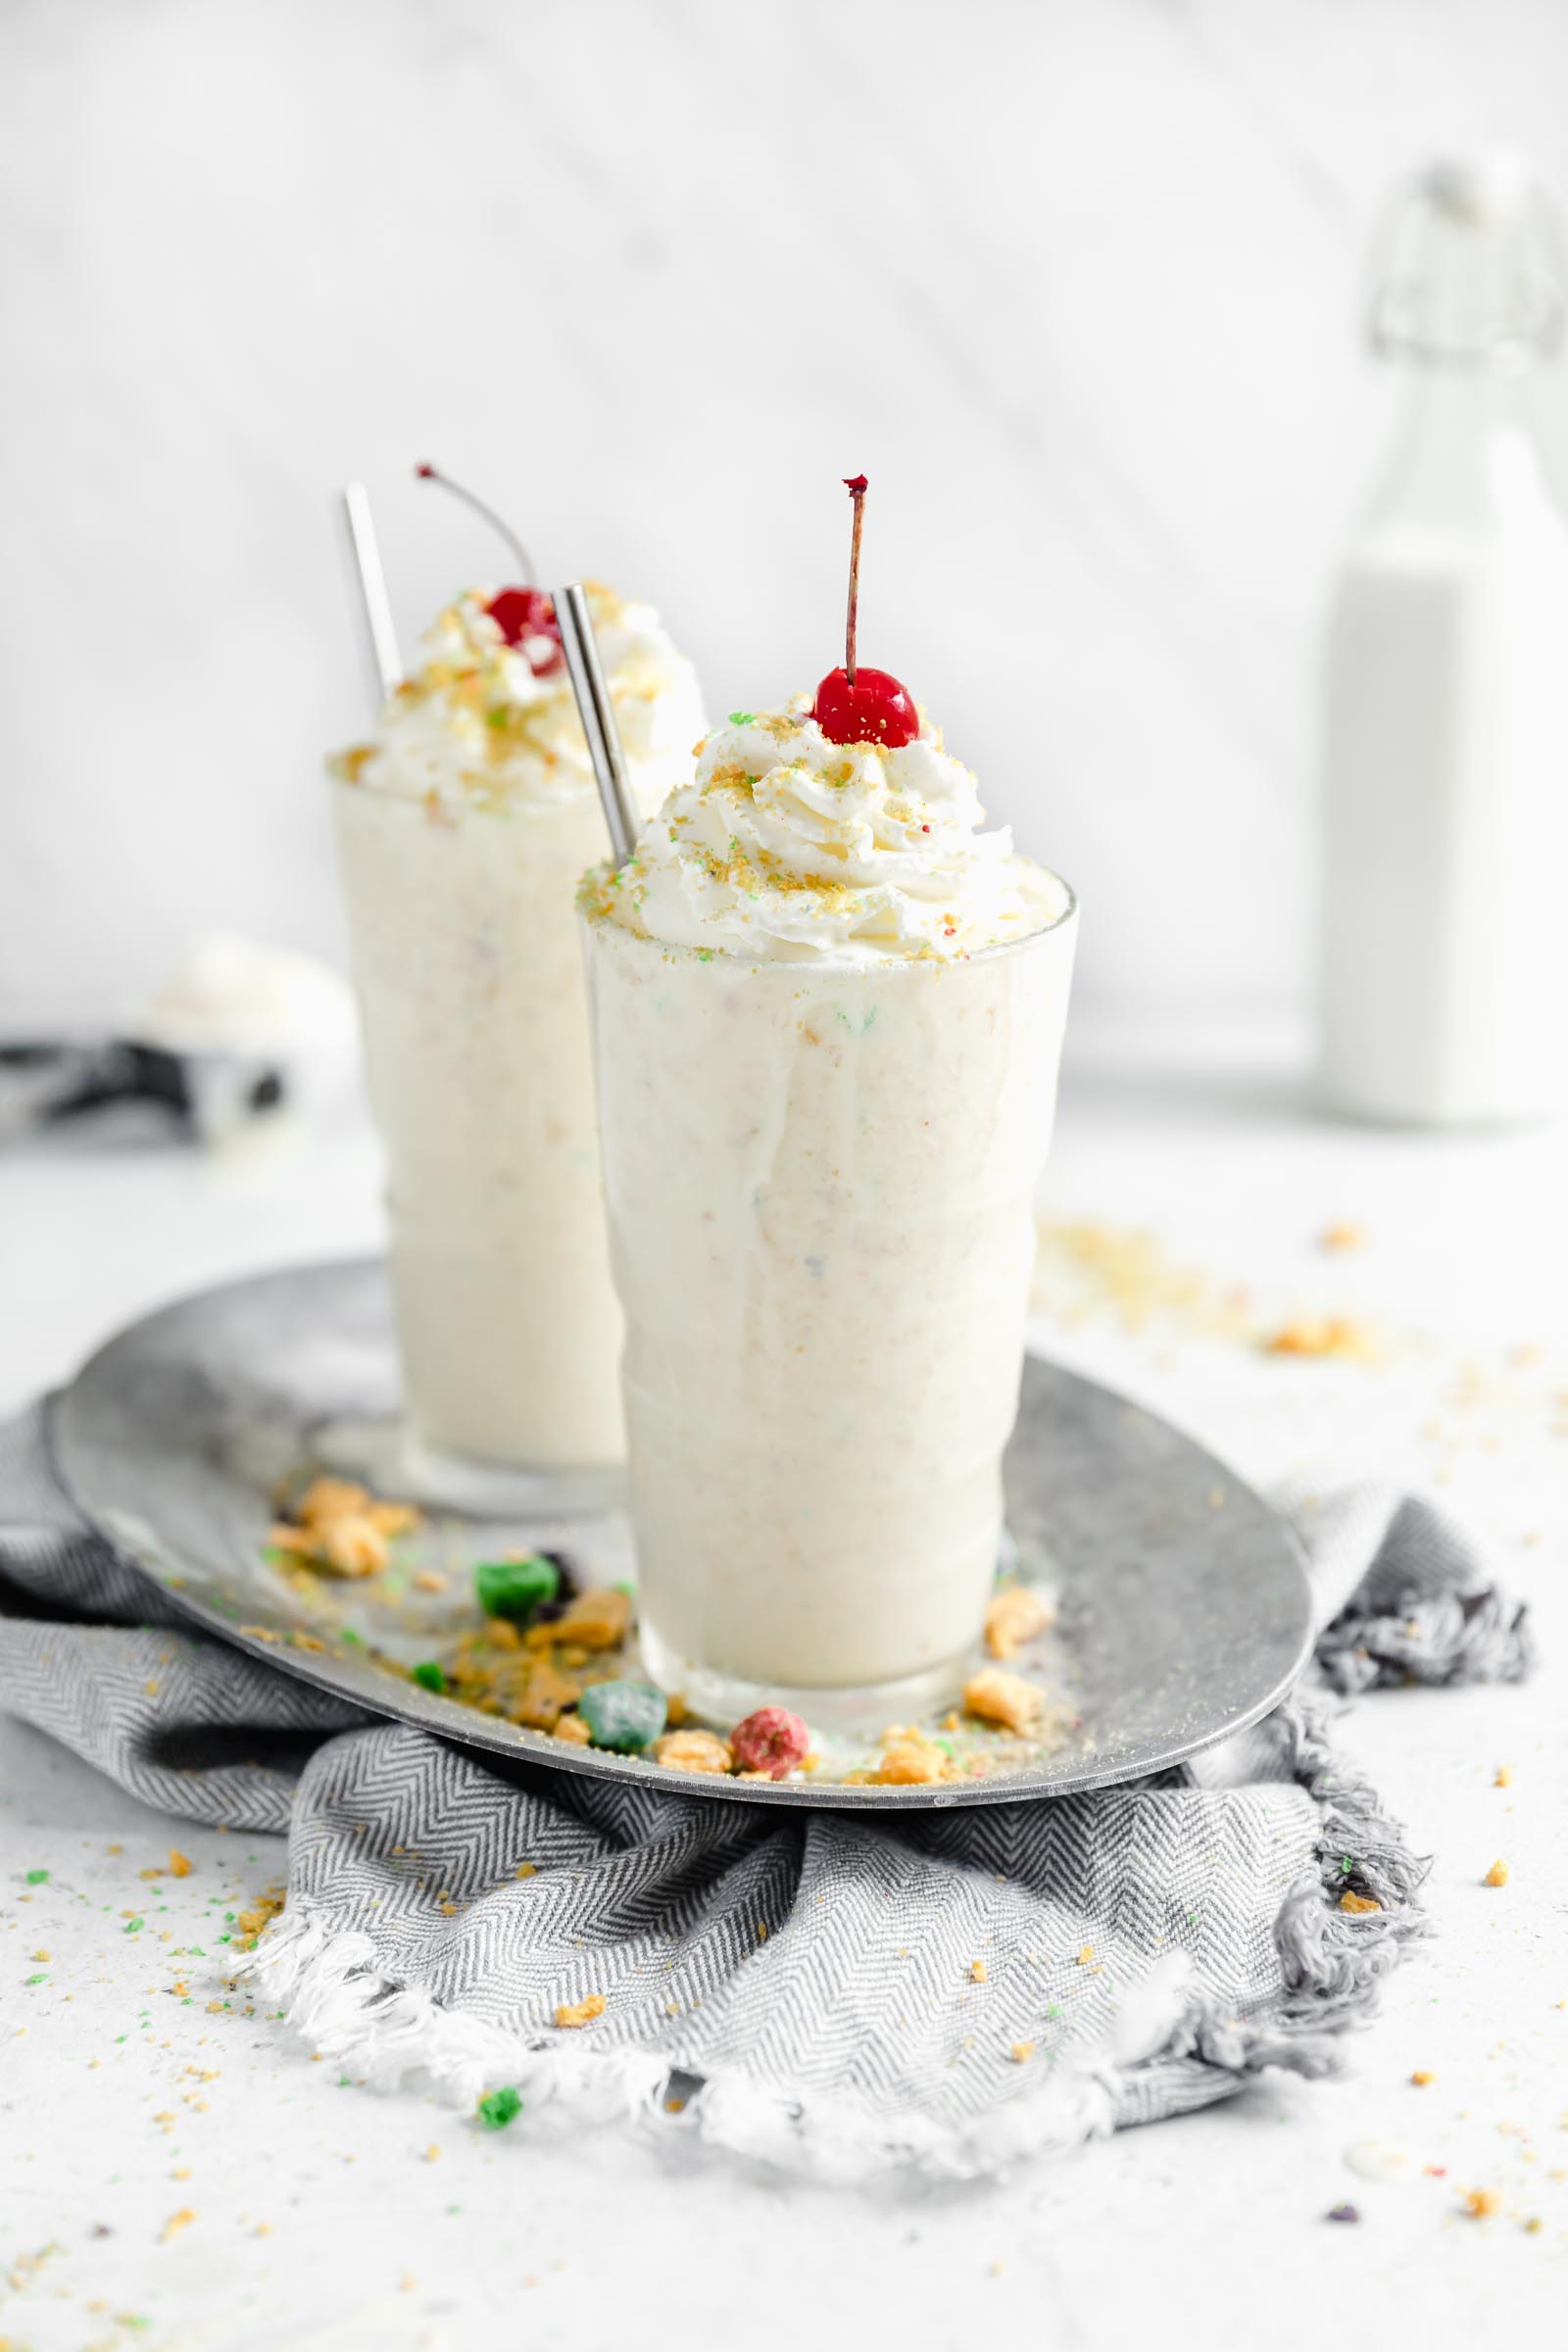 captain crunch milkshake with whipped cream and cherry on top